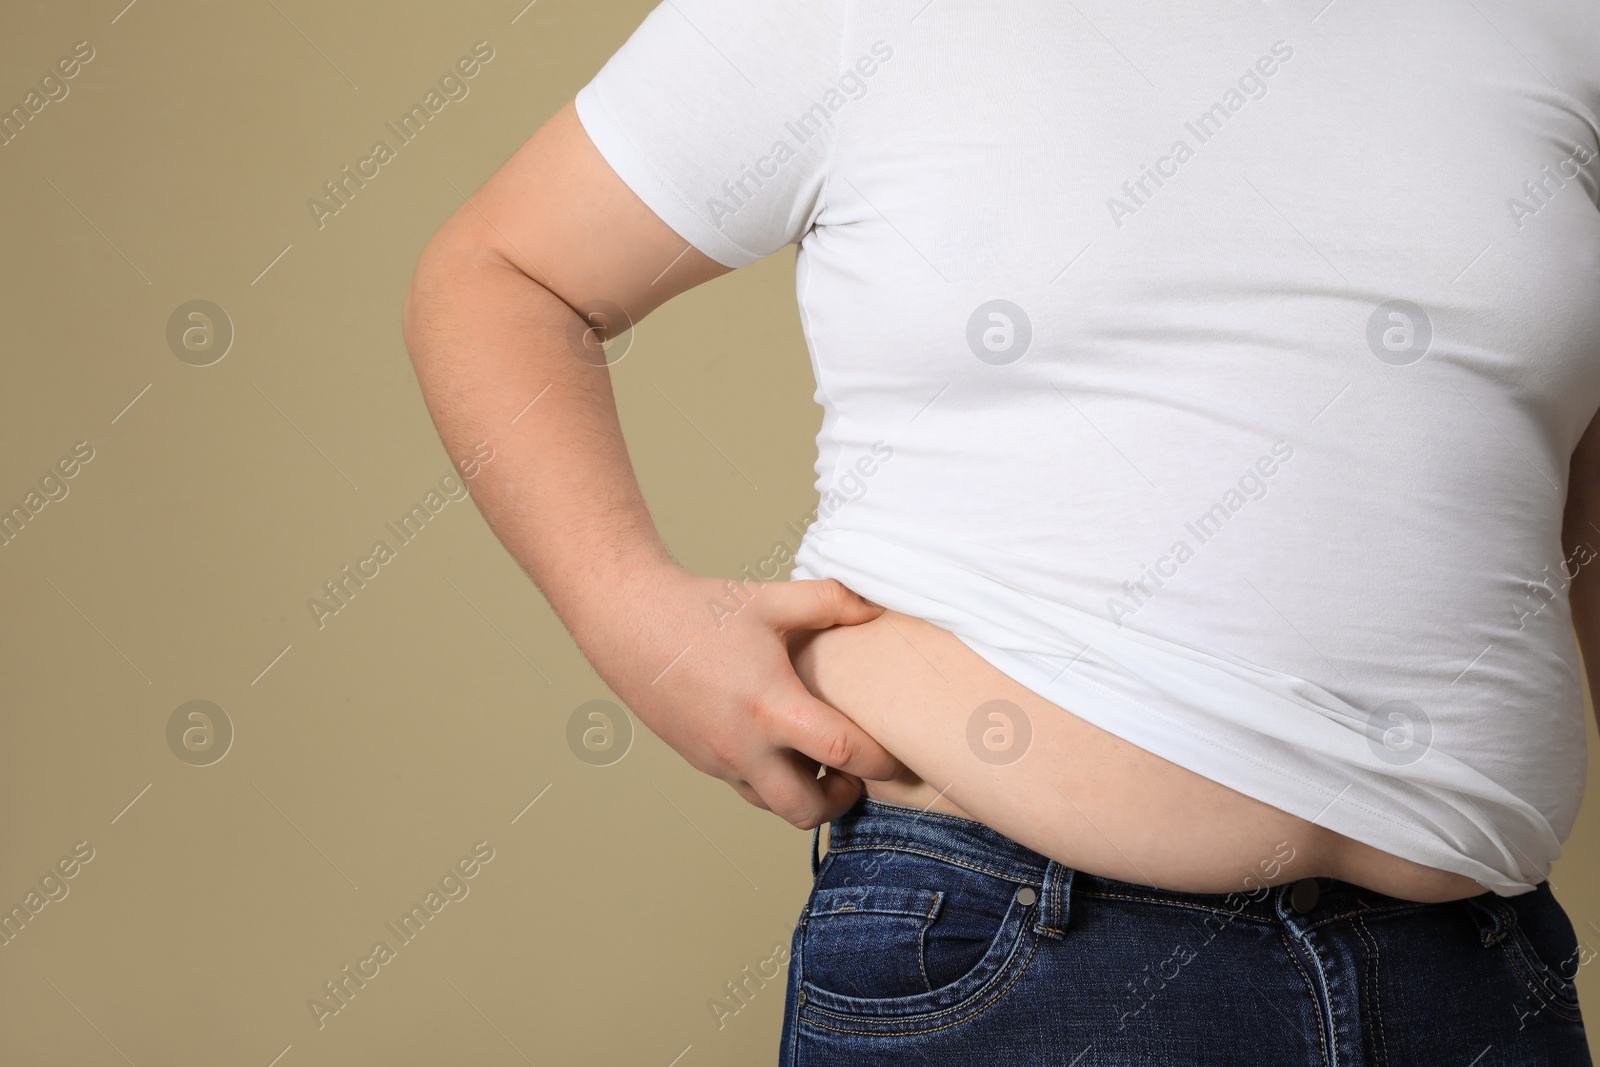 Photo of Overweight man in tight t-shirt on beige background, closeup